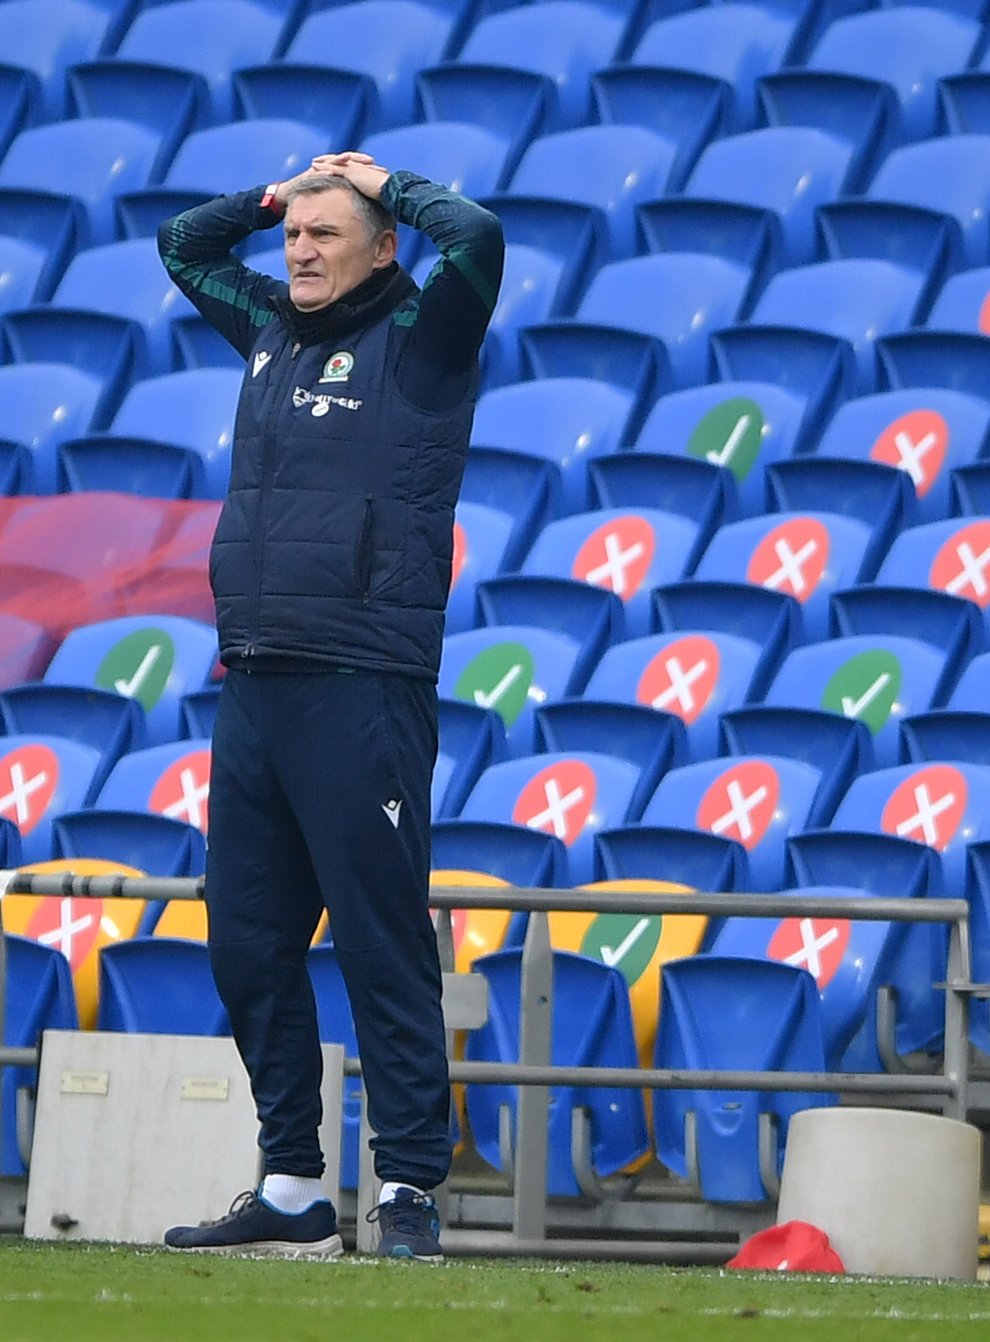 Blackburn boss Tony Mowbray is not getting carried away despite a 1-0 win at Cardiff leaving his side unbeaten in 10 Championship matches (Simon Galloway/PA Images).